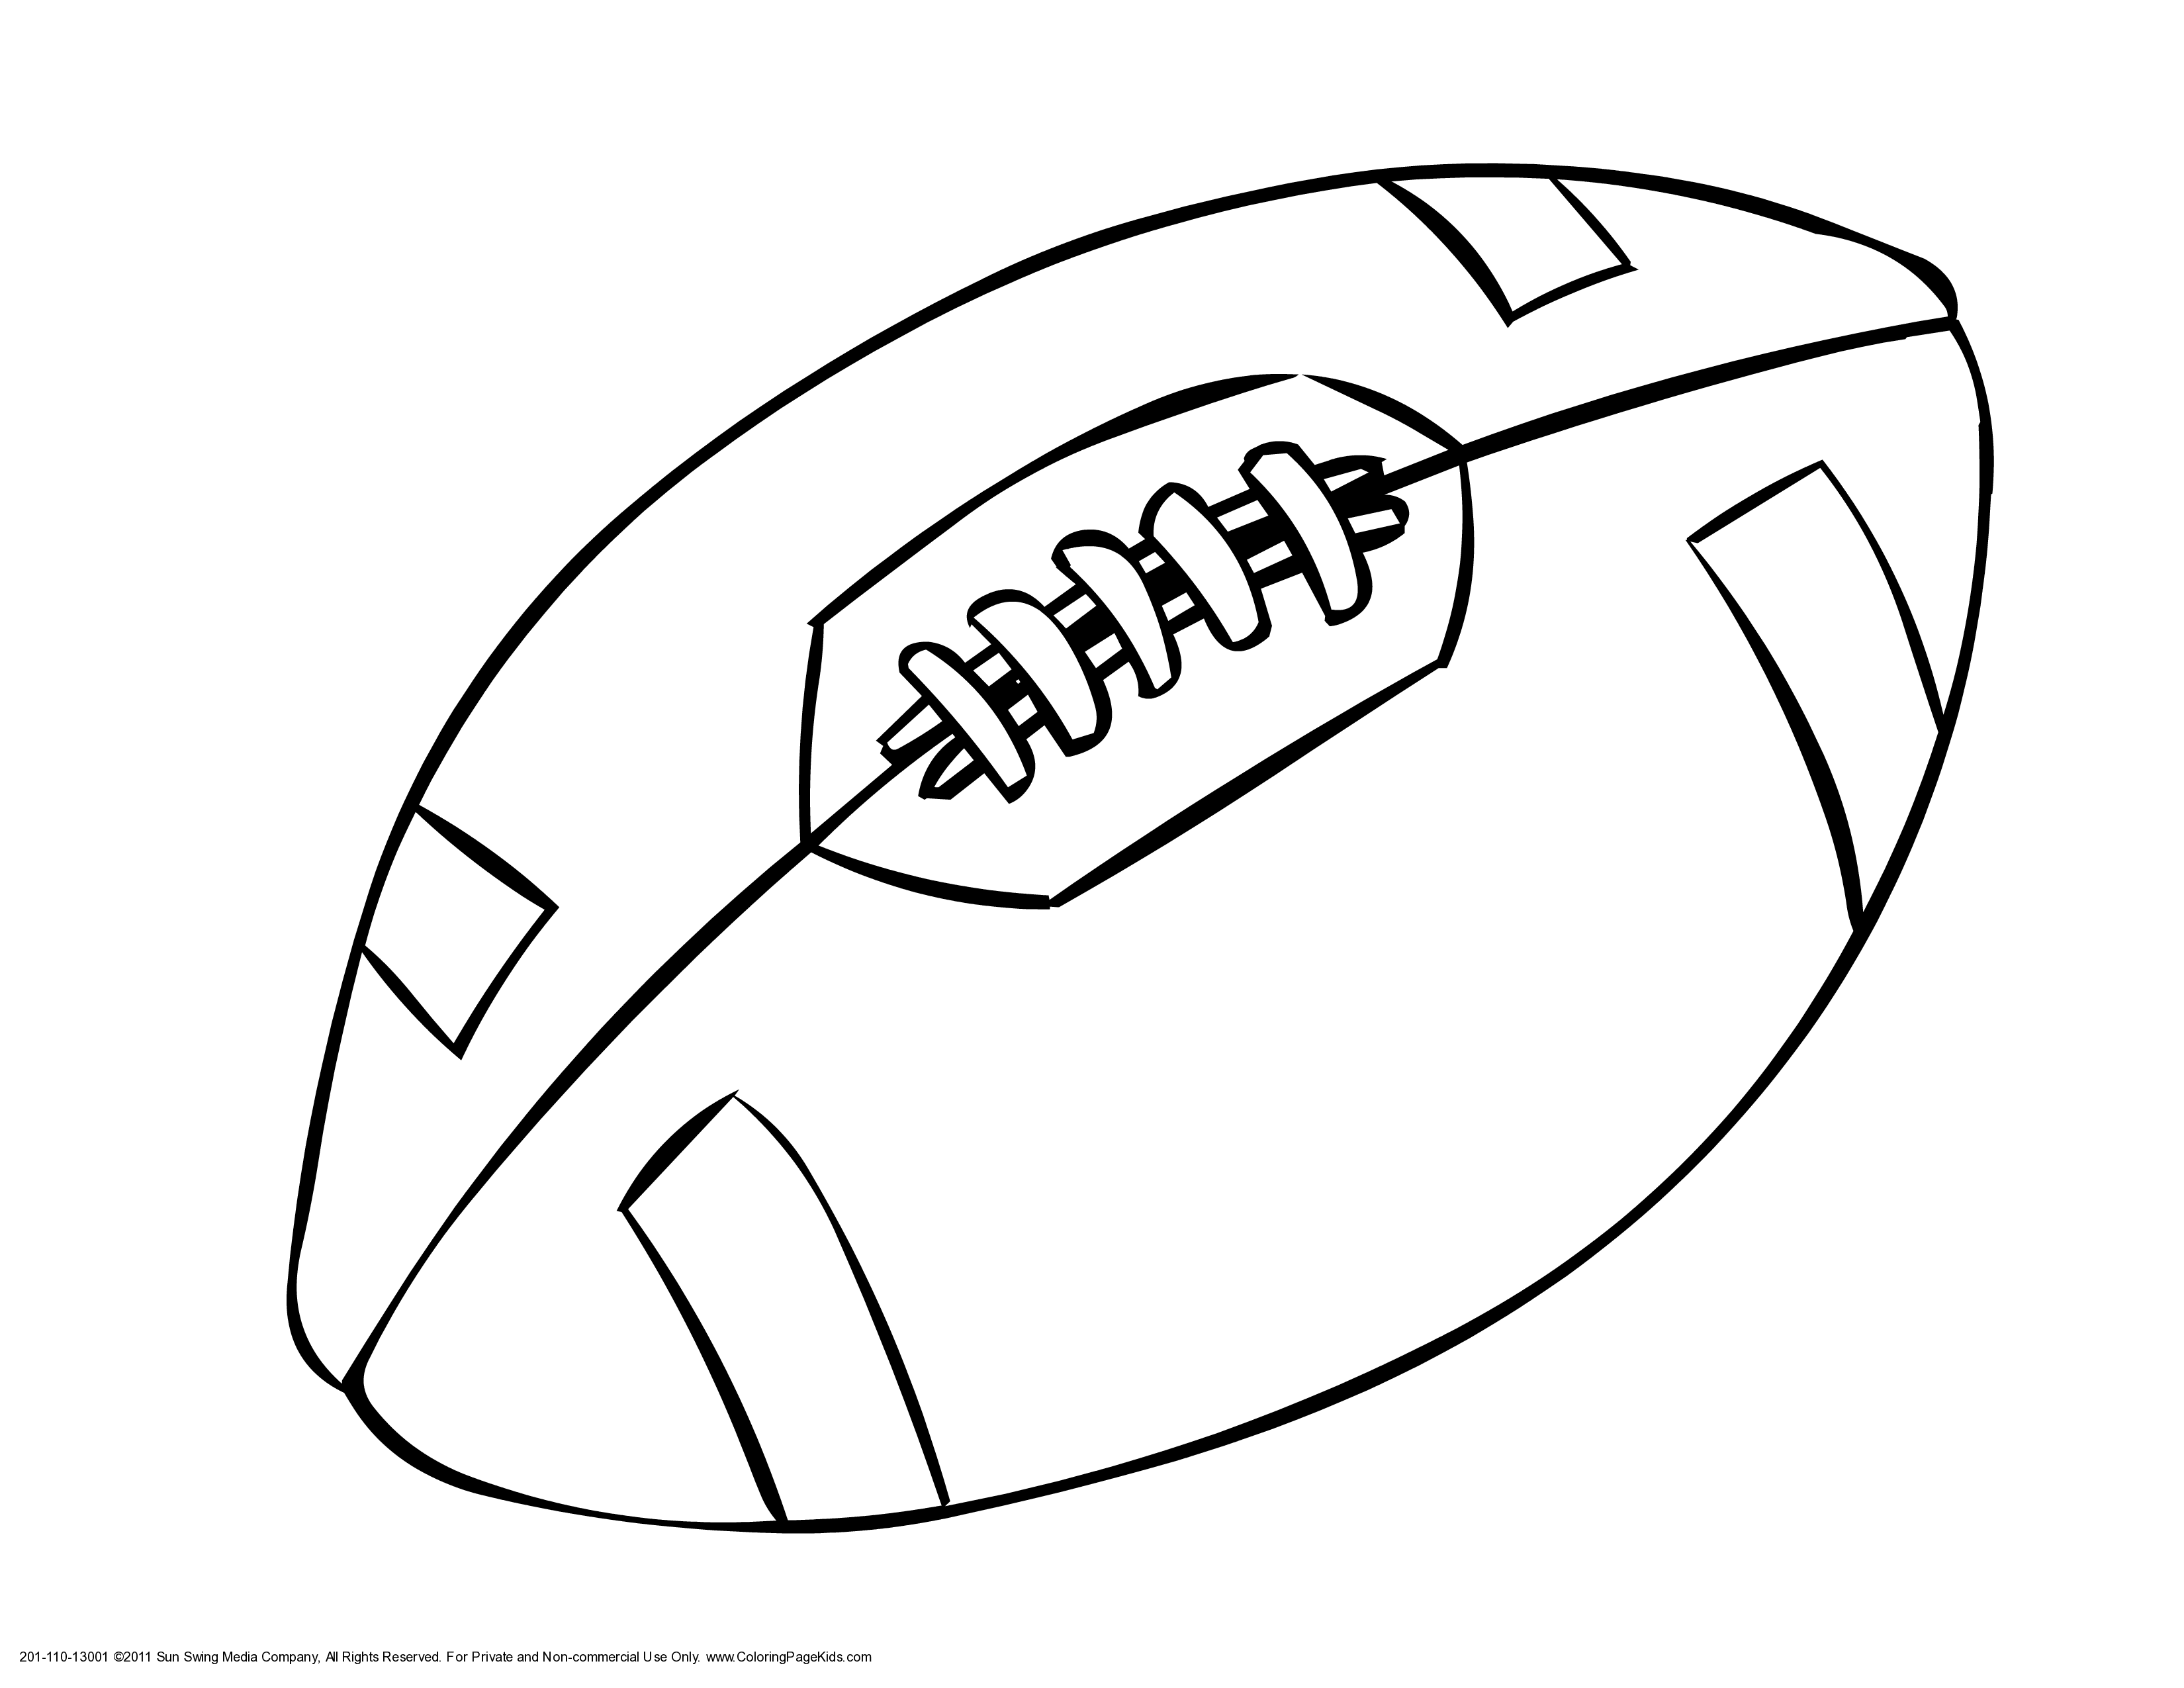 Pittsburgh Steelers Coloring Pages - Coloring Home